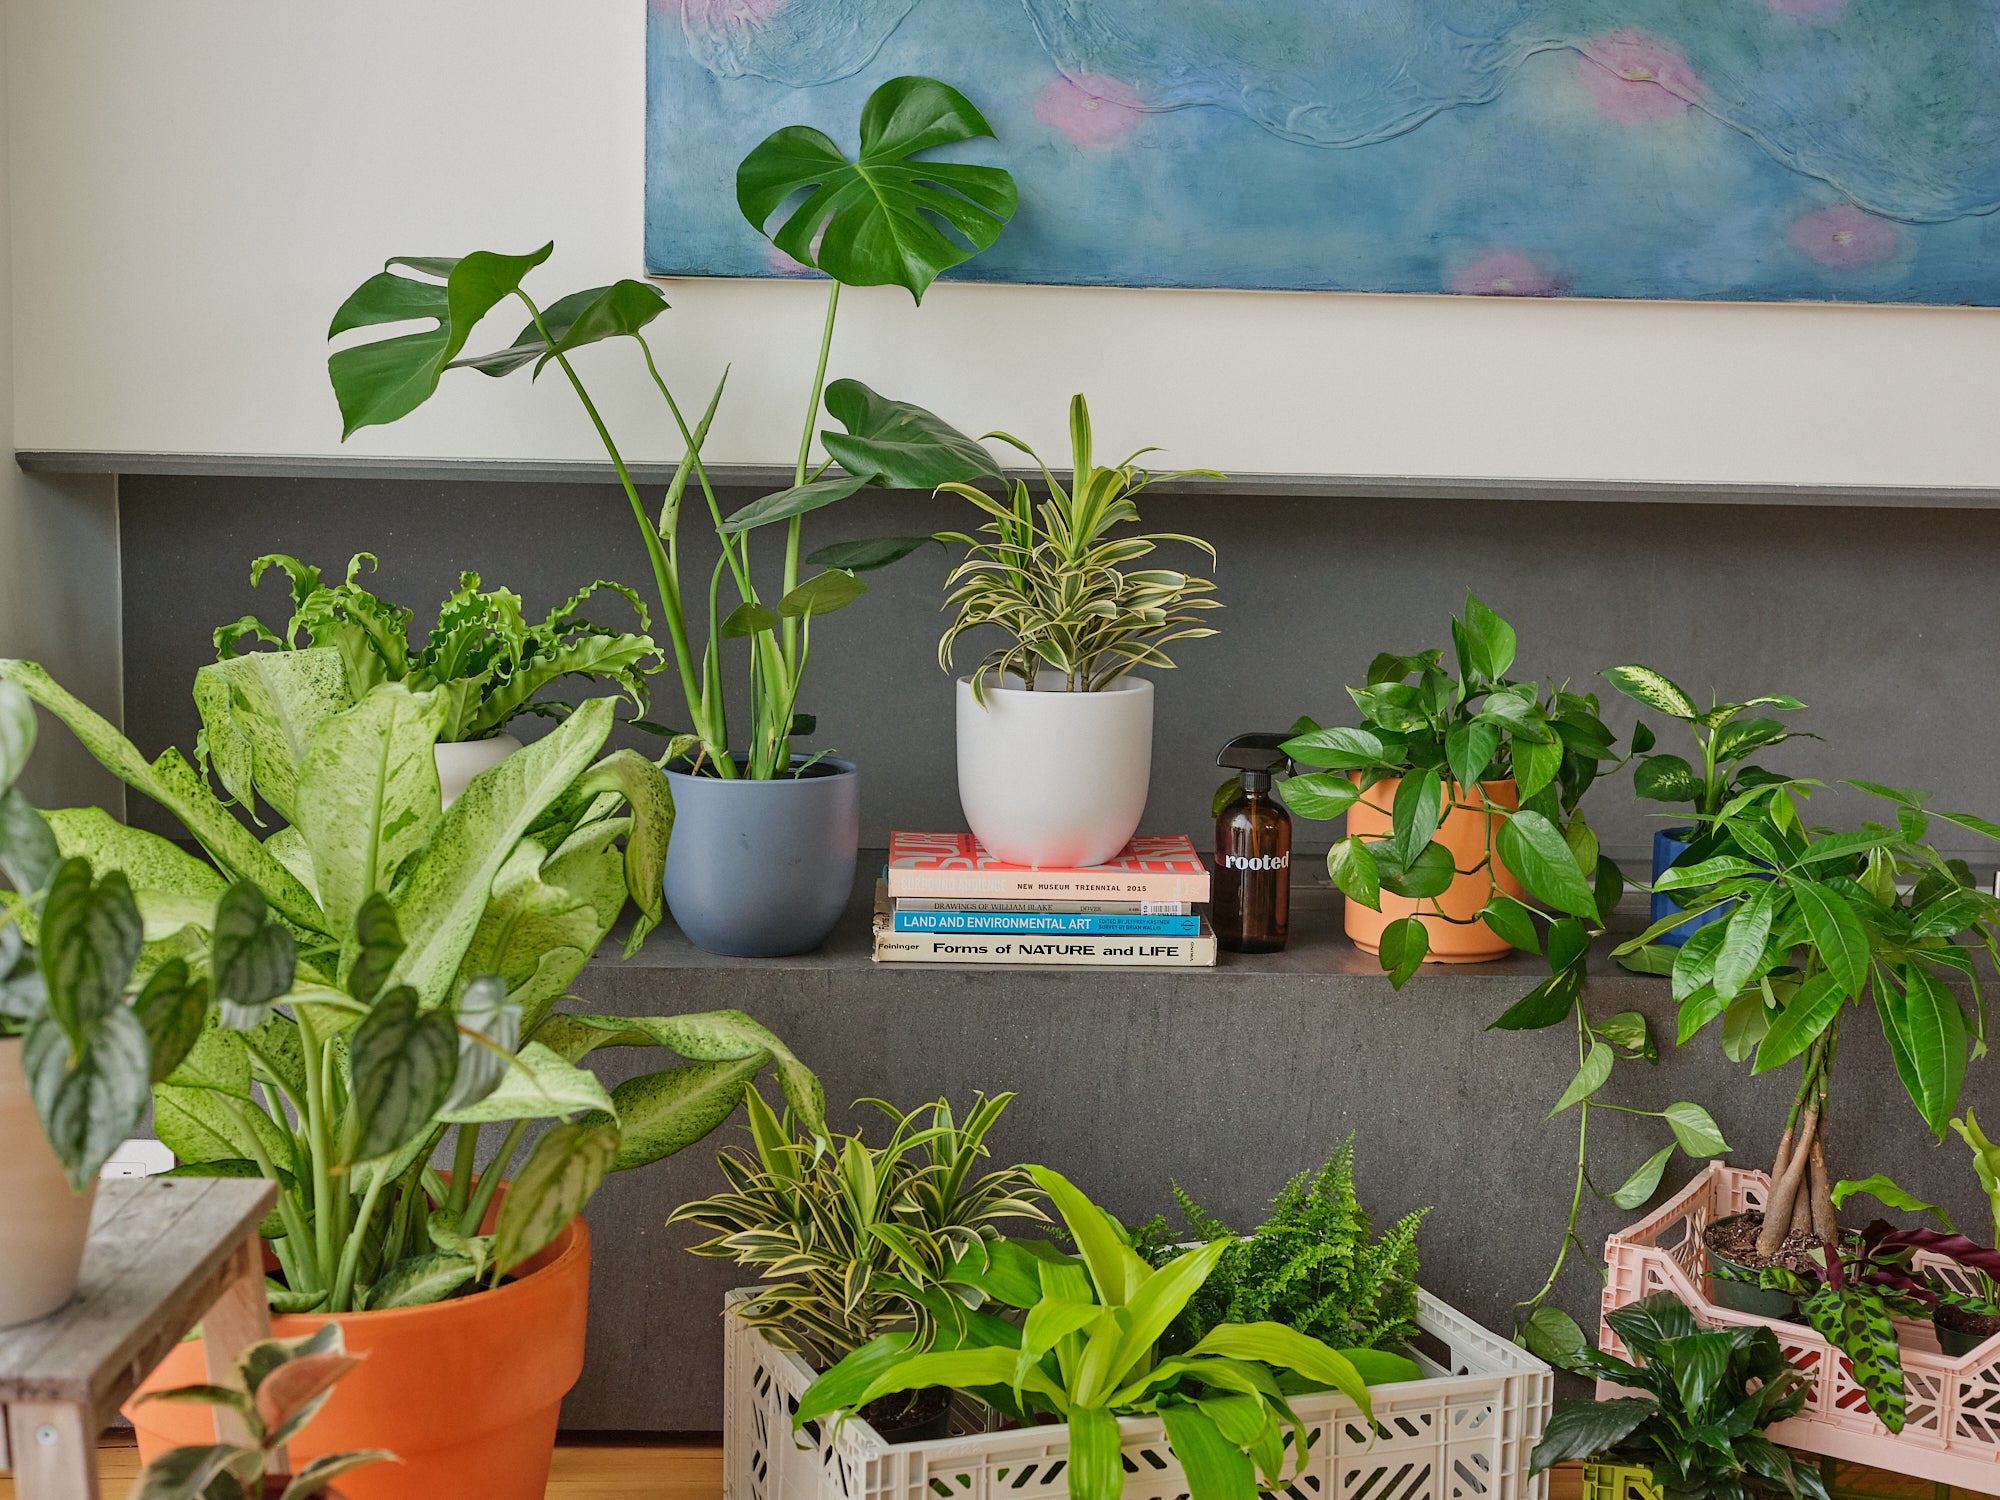 Assorted houseplants against a gray background